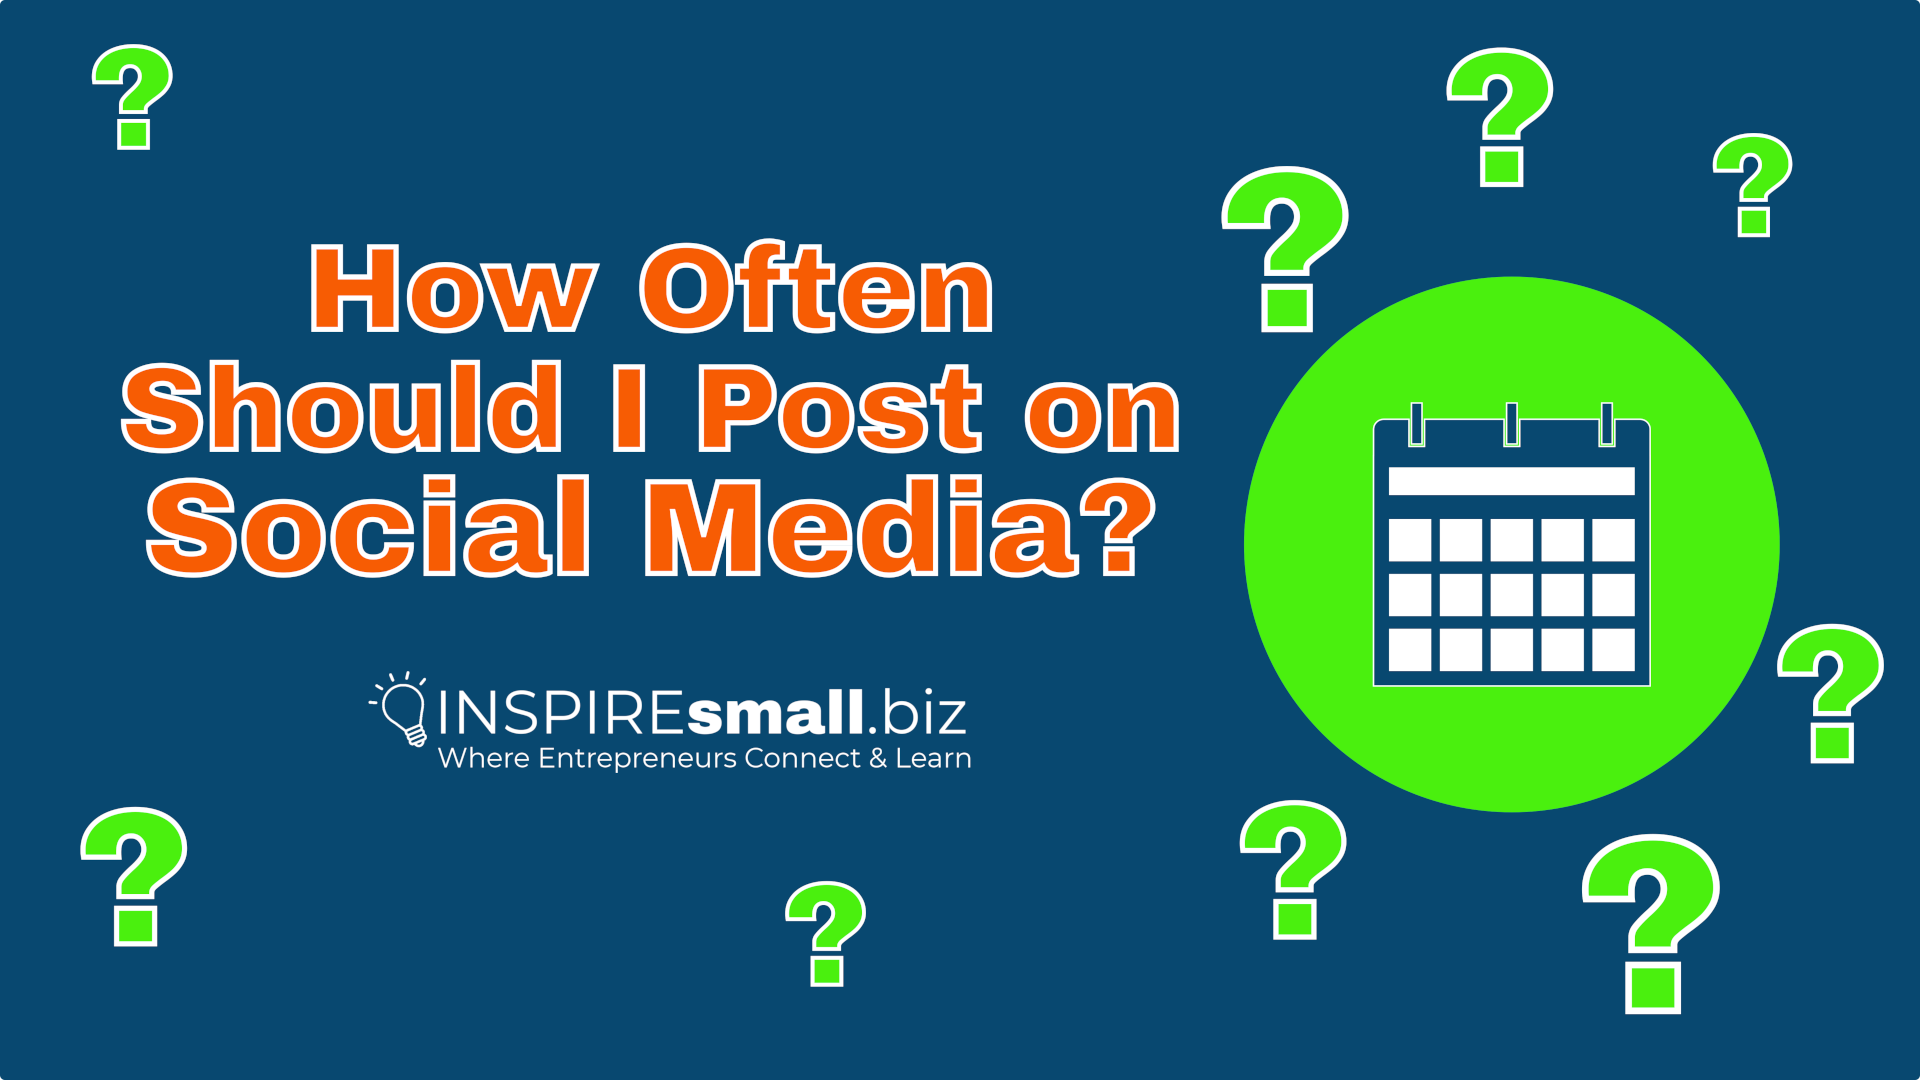 How Often Should I post on Social Media? With an image of a calendar and lots of question marks